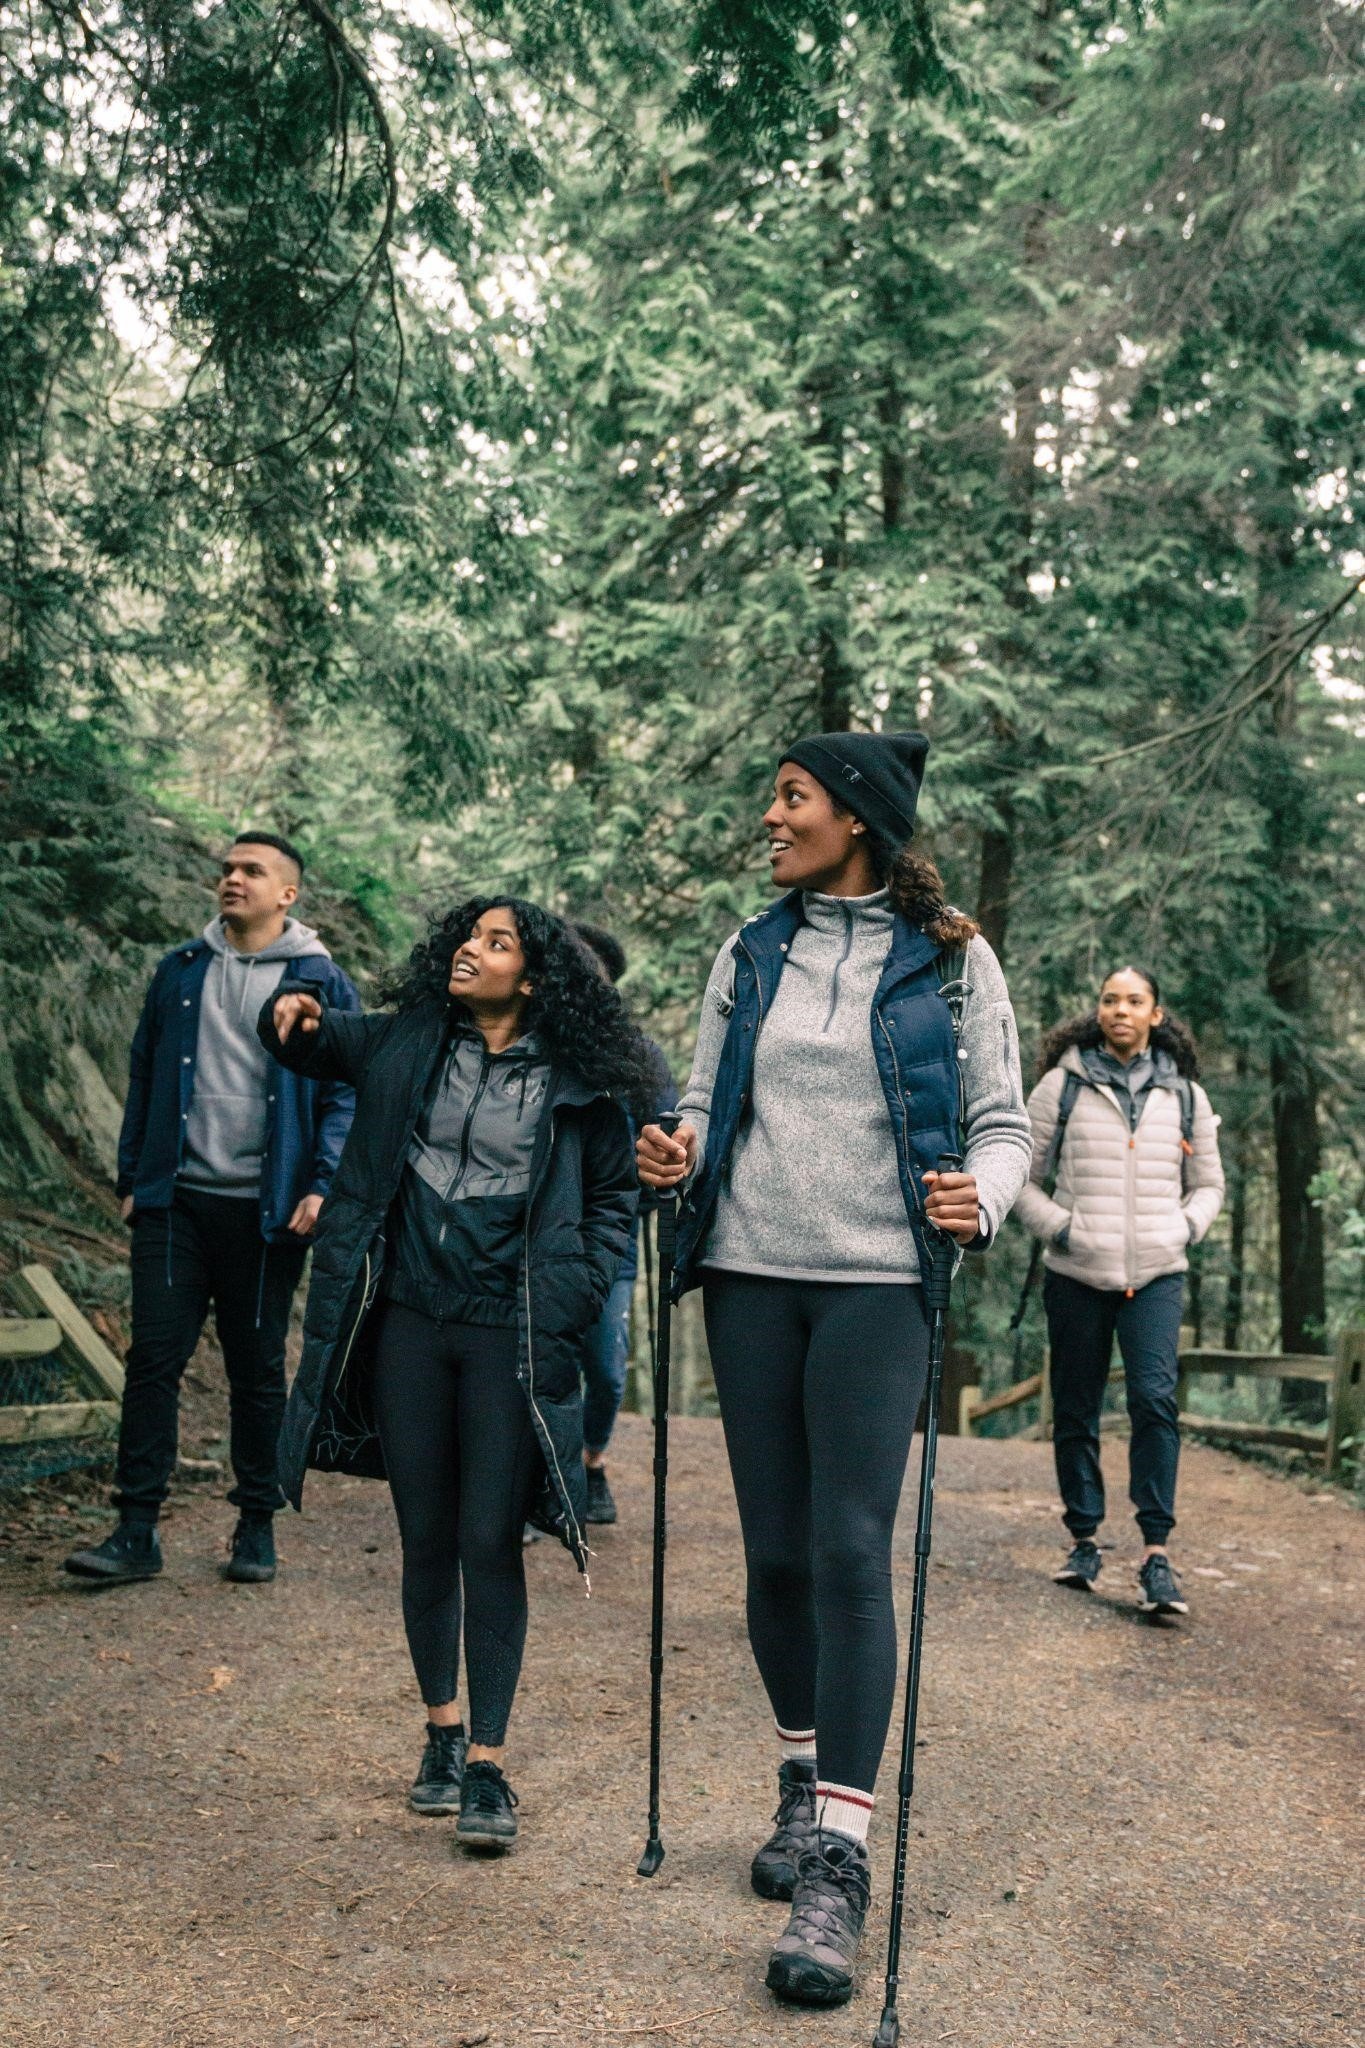 A group of four people are talking and hiking in the woods. One of them is holding two walking sticks.